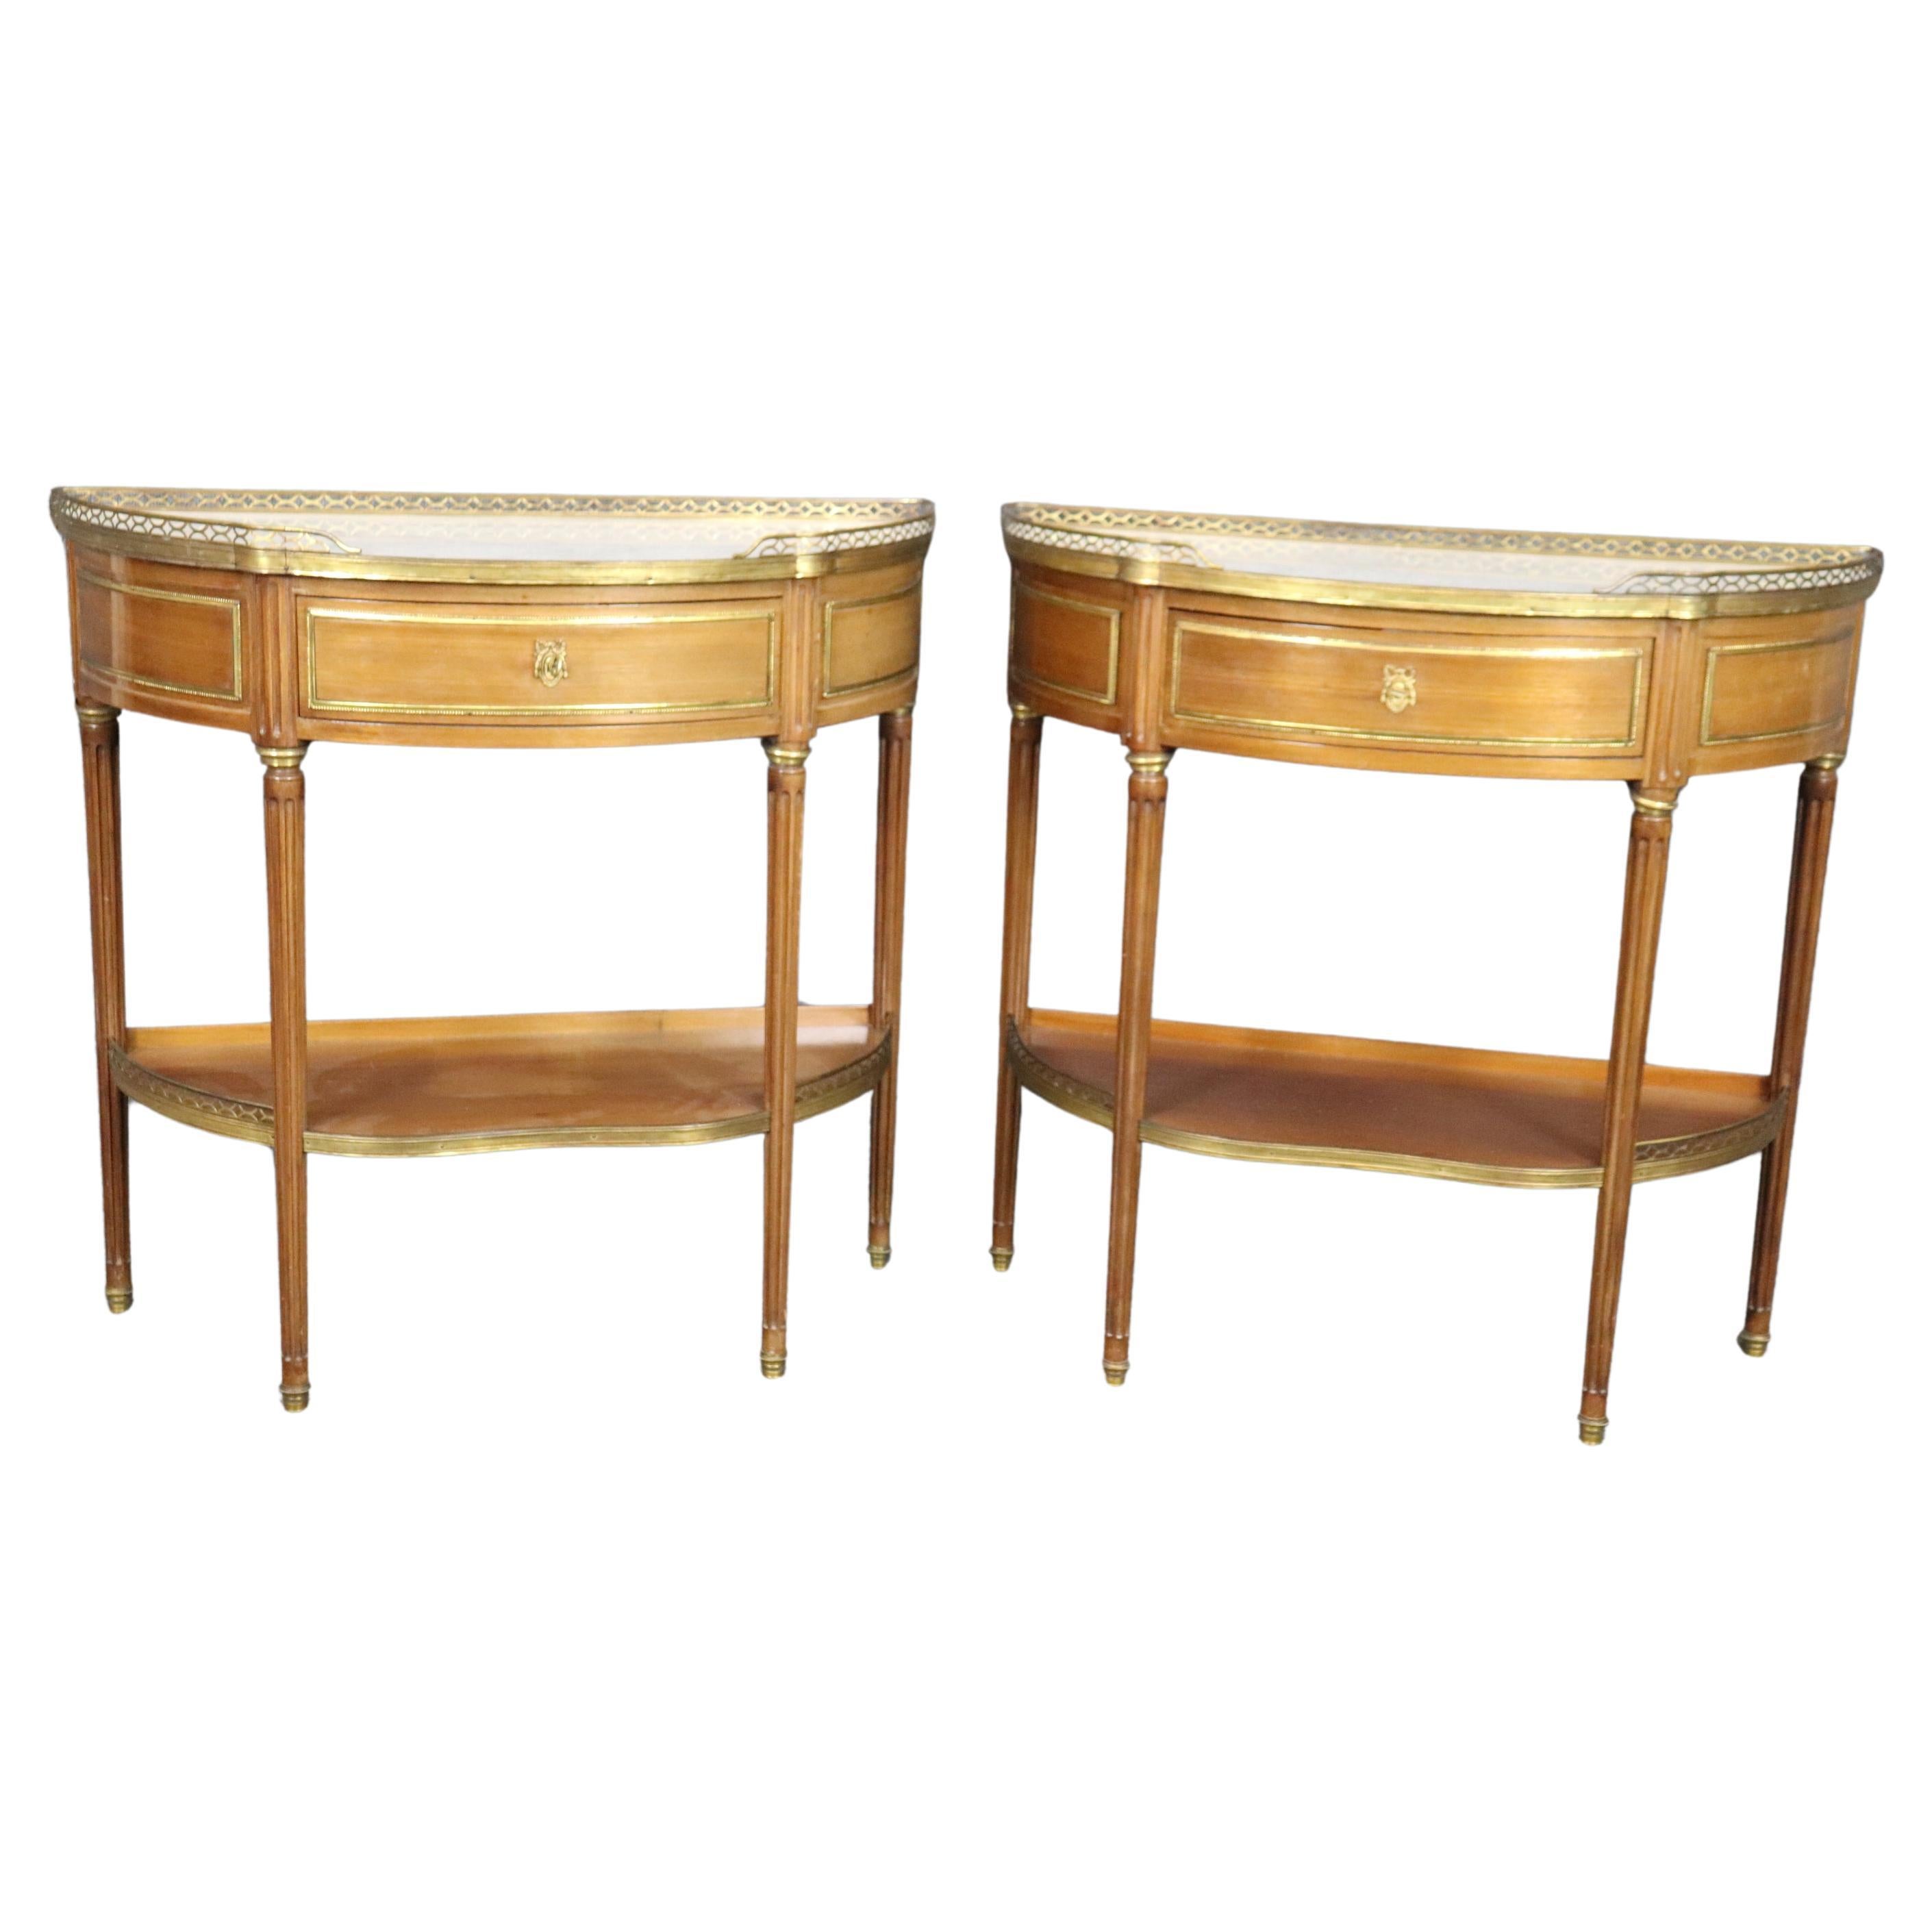  Superb Pair of Marble Top Bronze Mounted French Demilune Console Tables  For Sale